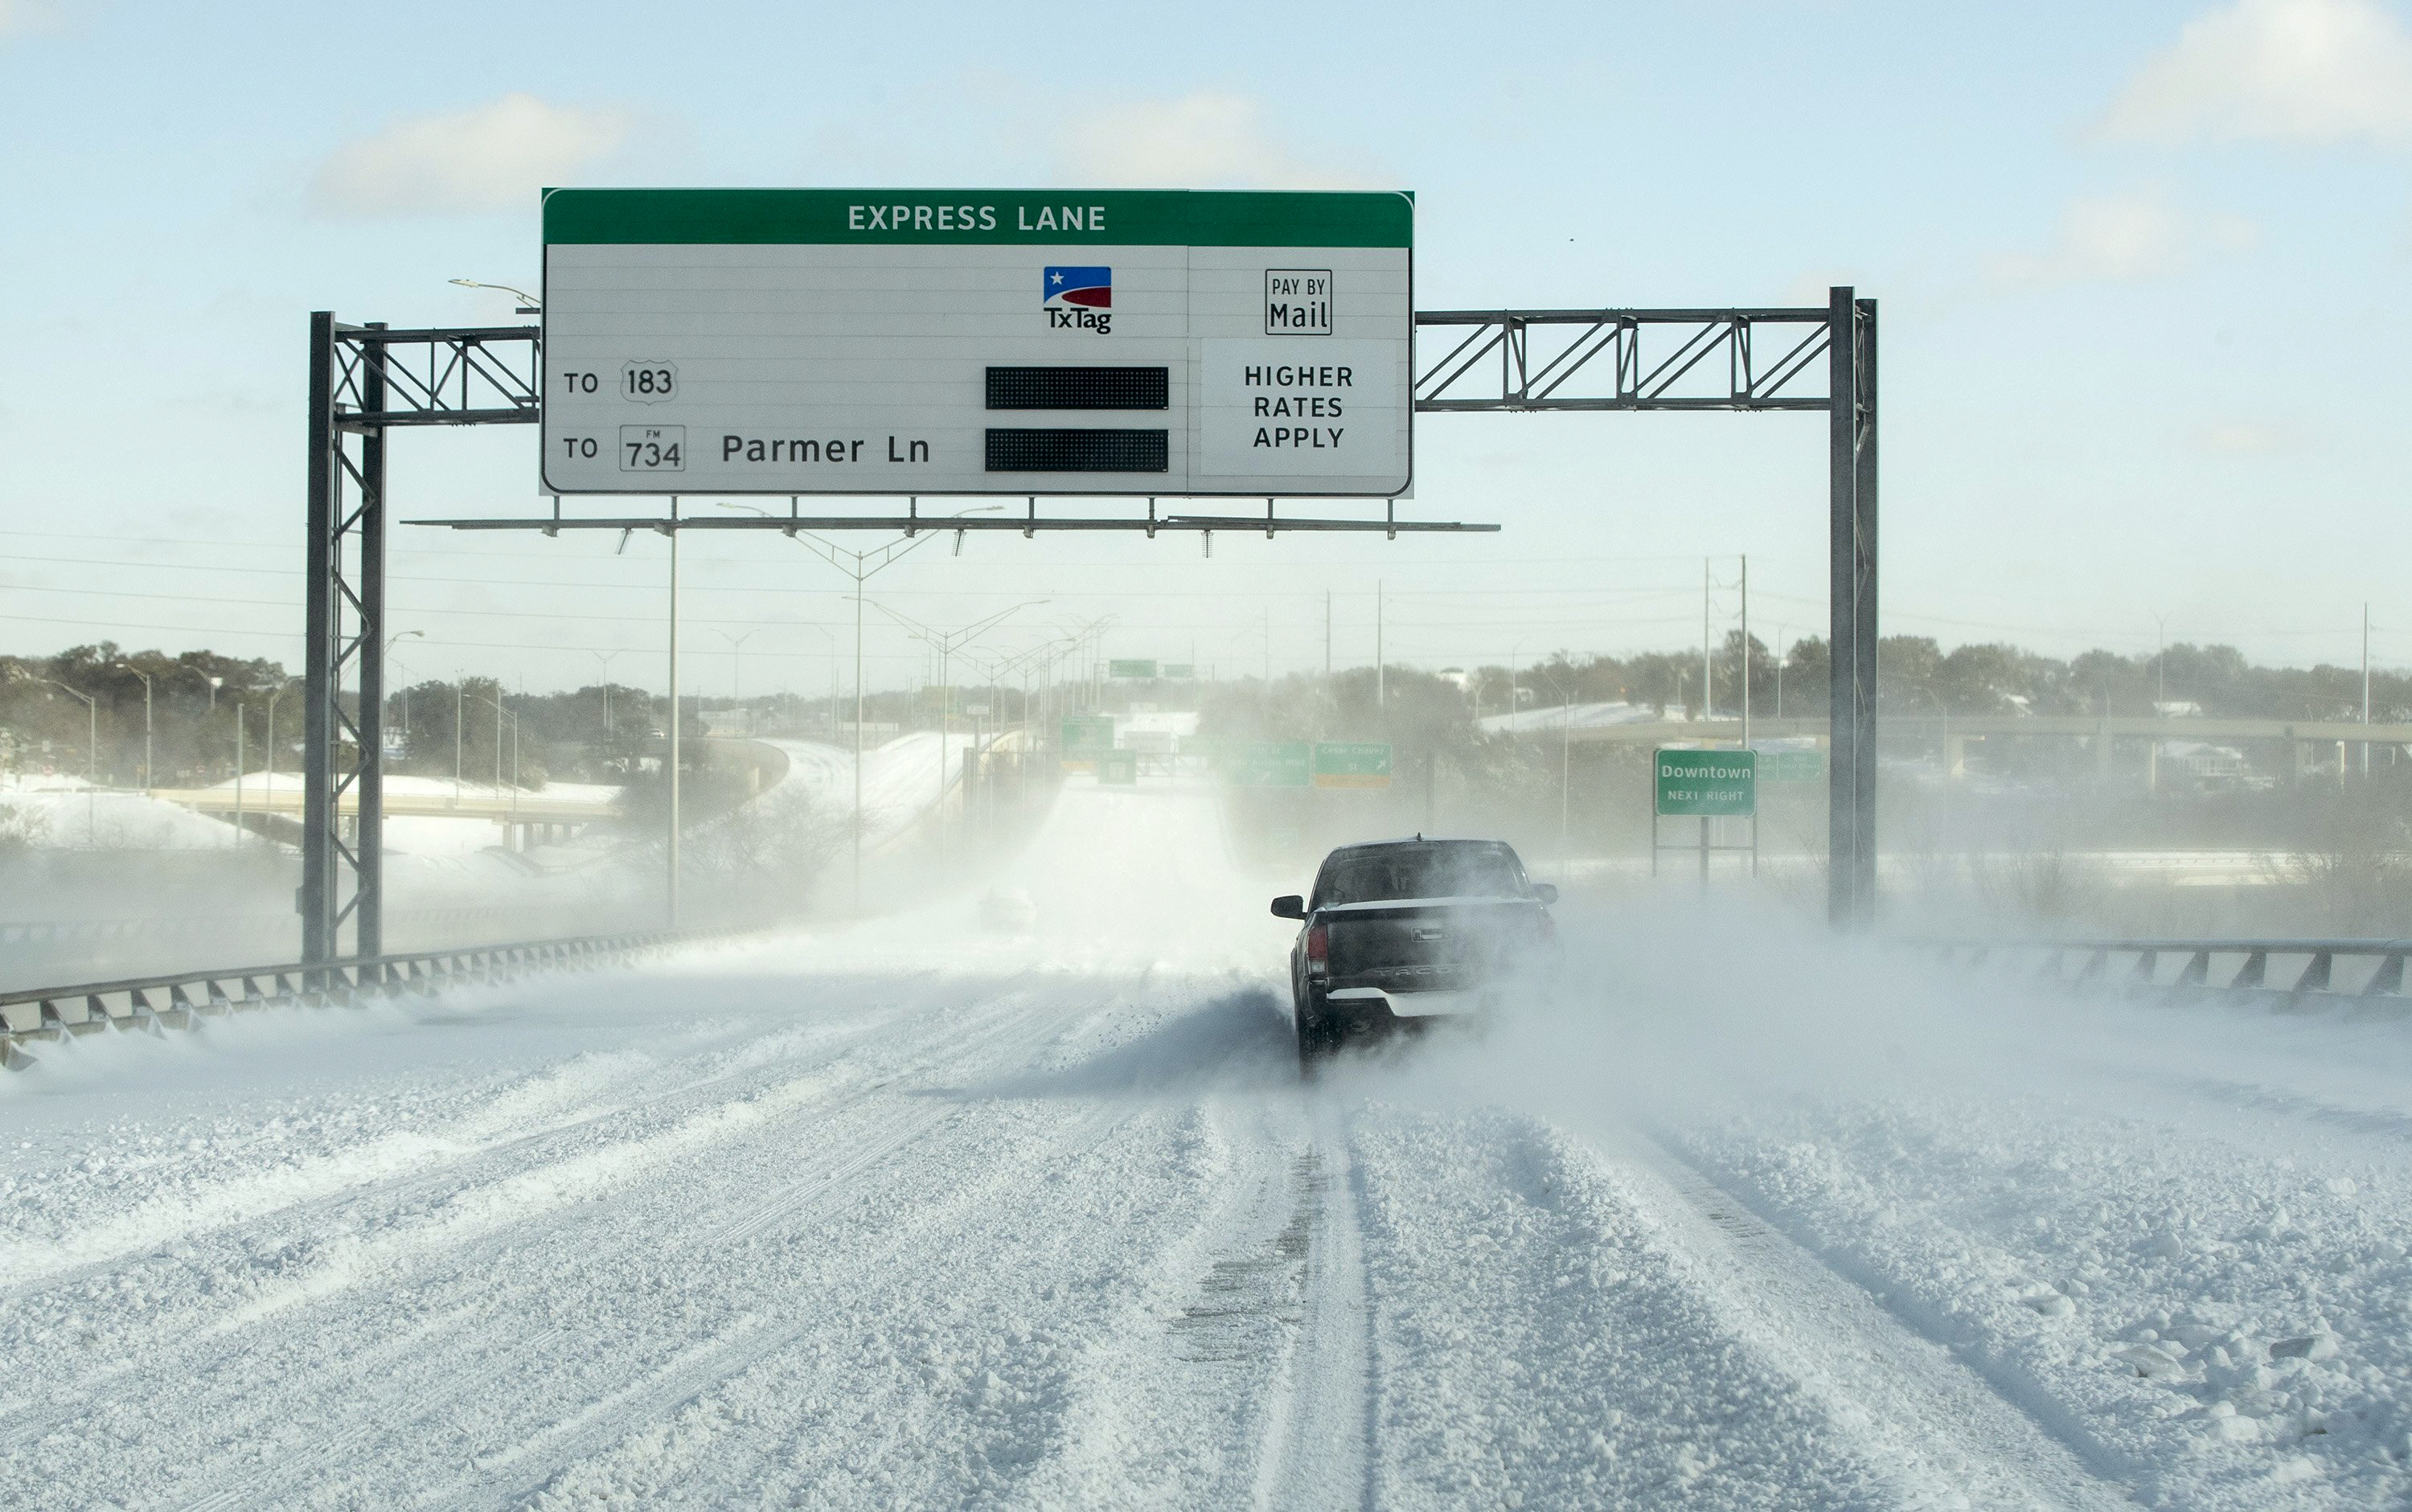 A truck drives in the snow on a Texas highway. A toll road saying "Express Lane to 183 to 737 Parmer Ln" appears above the road with its power out.